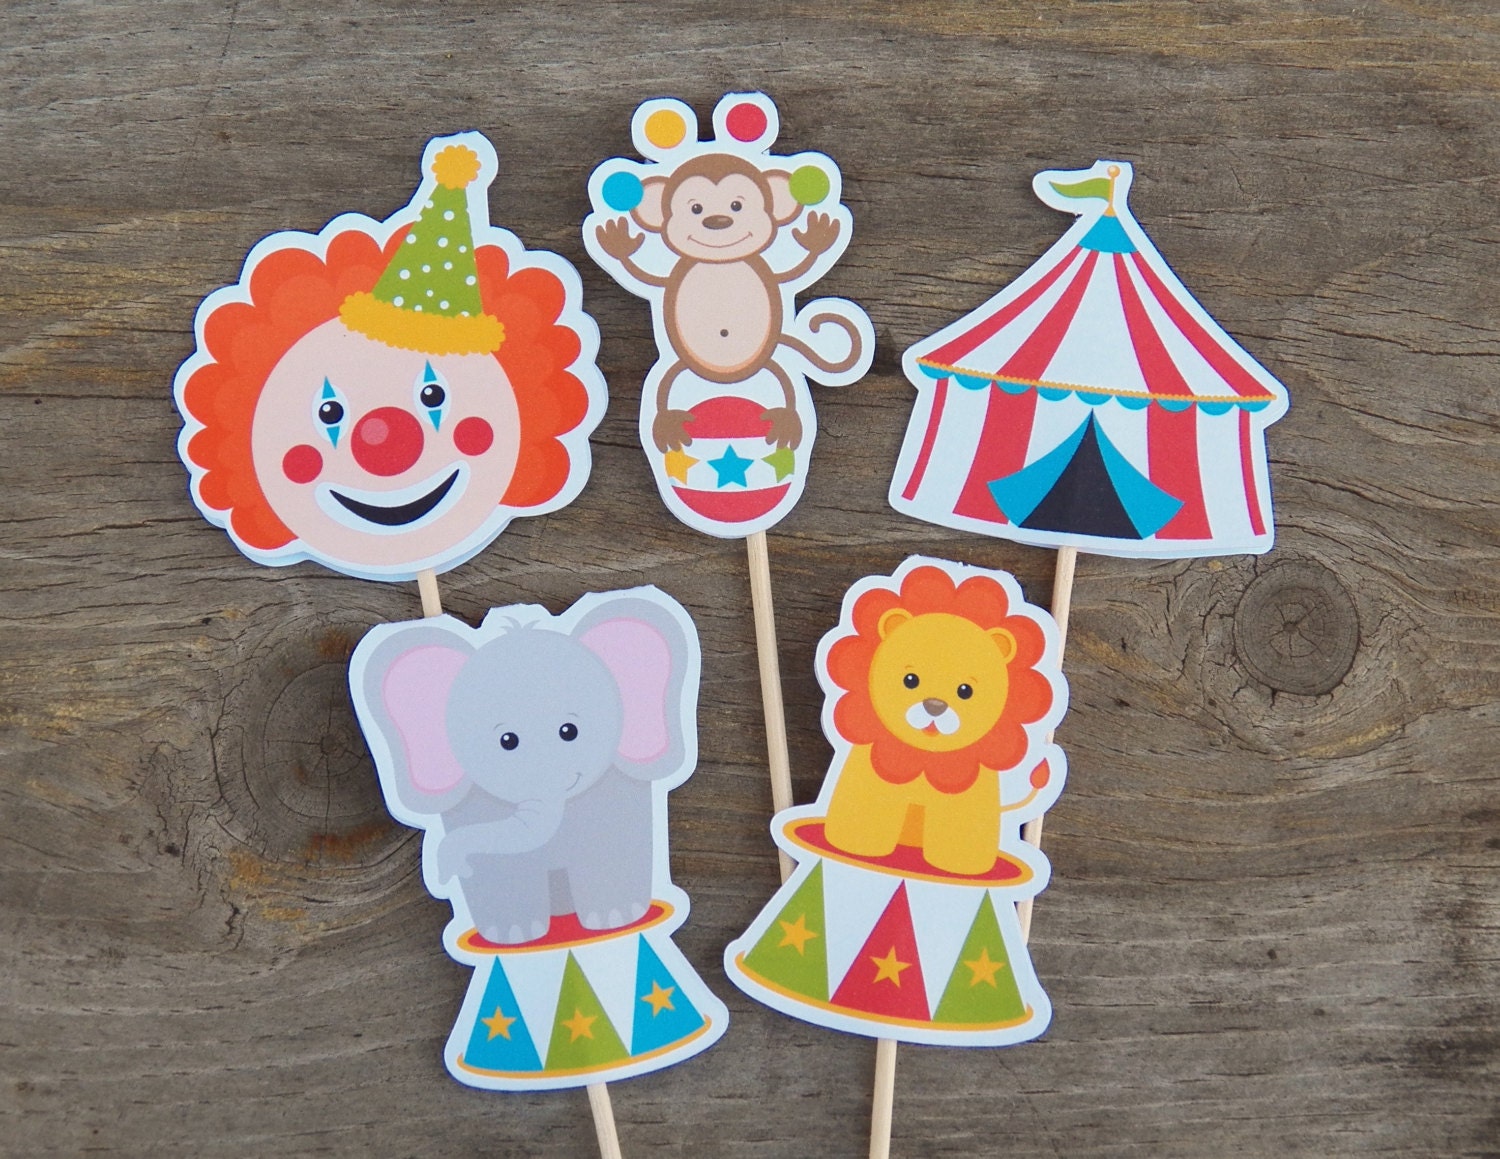 Circus Party - Set of 15 Assorted Big Top Circus Cupcake Toppers by The Birthday House